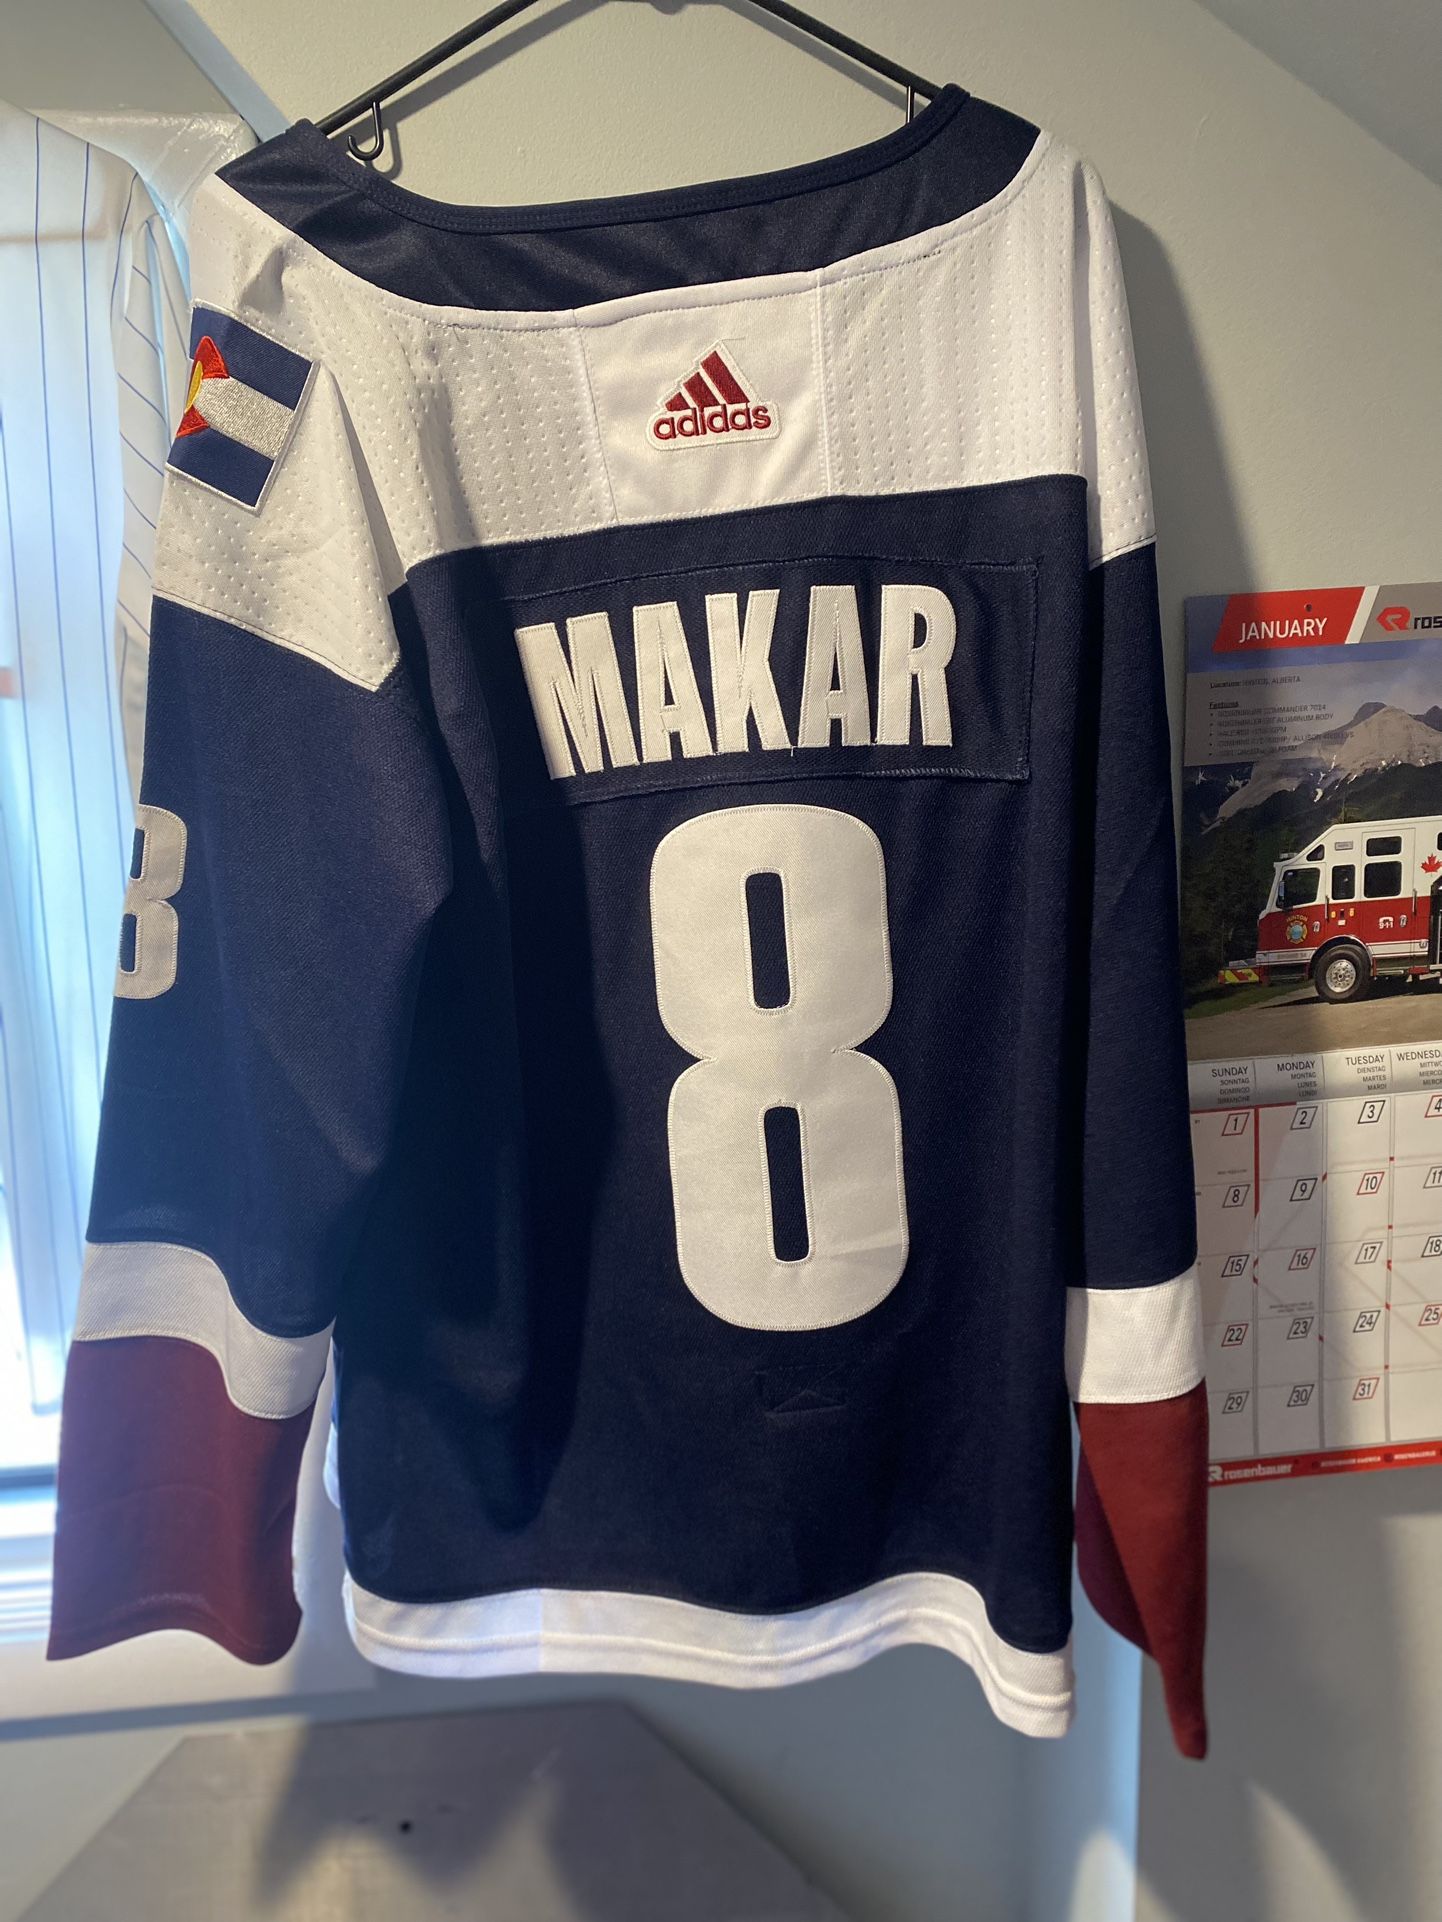 Brand new Cale Makar Colorado Avalanche jersey for Sale in Thornton, CO -  OfferUp